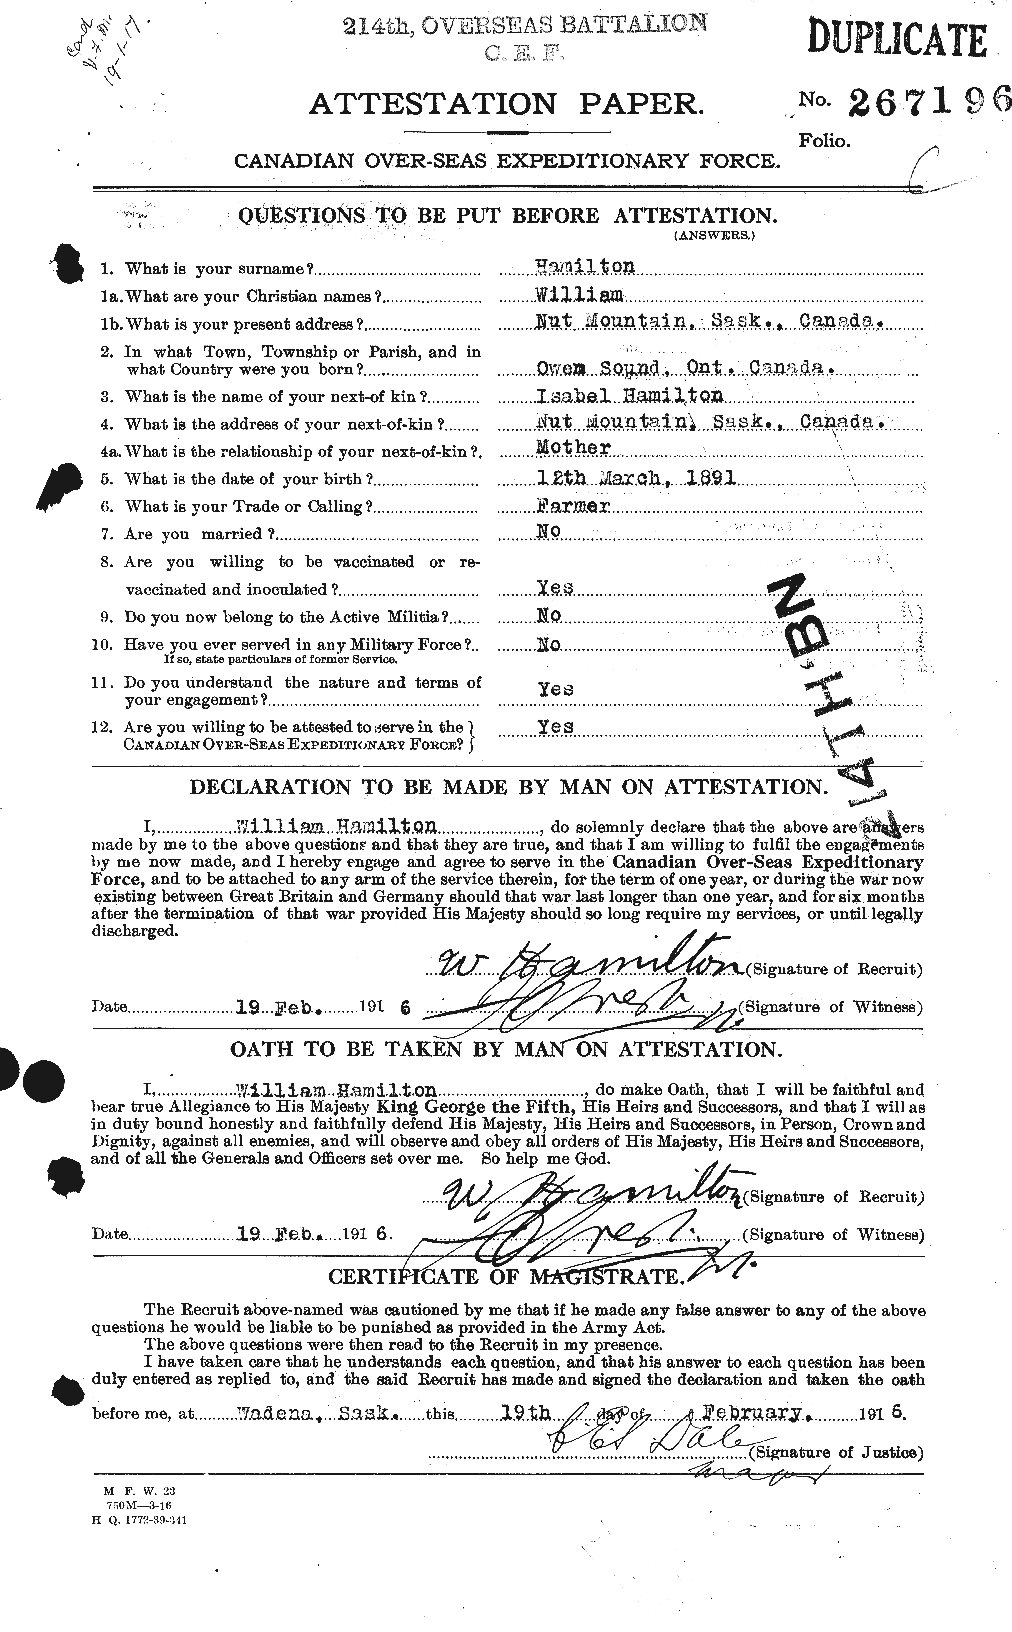 Personnel Records of the First World War - CEF 374837a